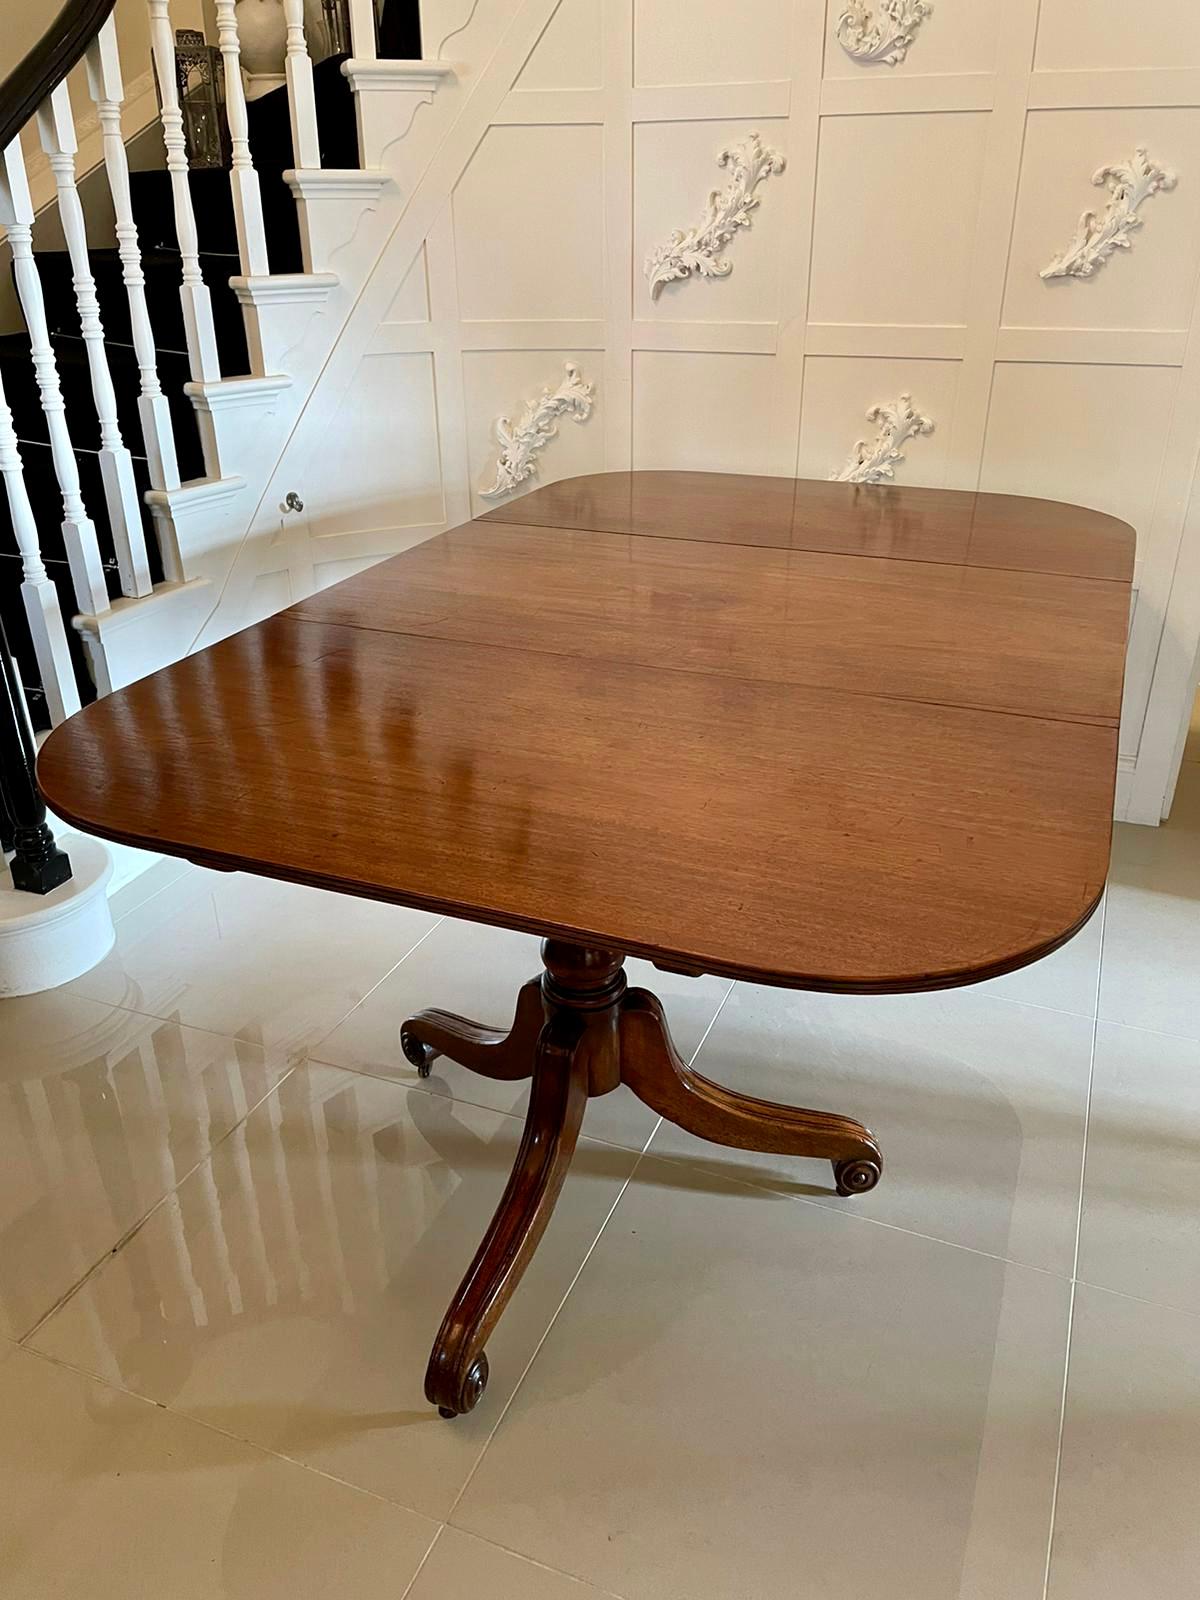 Fine Quality George III Antique mahogany twin pedestal dining table

Fine quality George III antique mahogany twin pedestal dining table having a quality mahogany top in with one original extra leaf, supported by two original mahogany pedestals